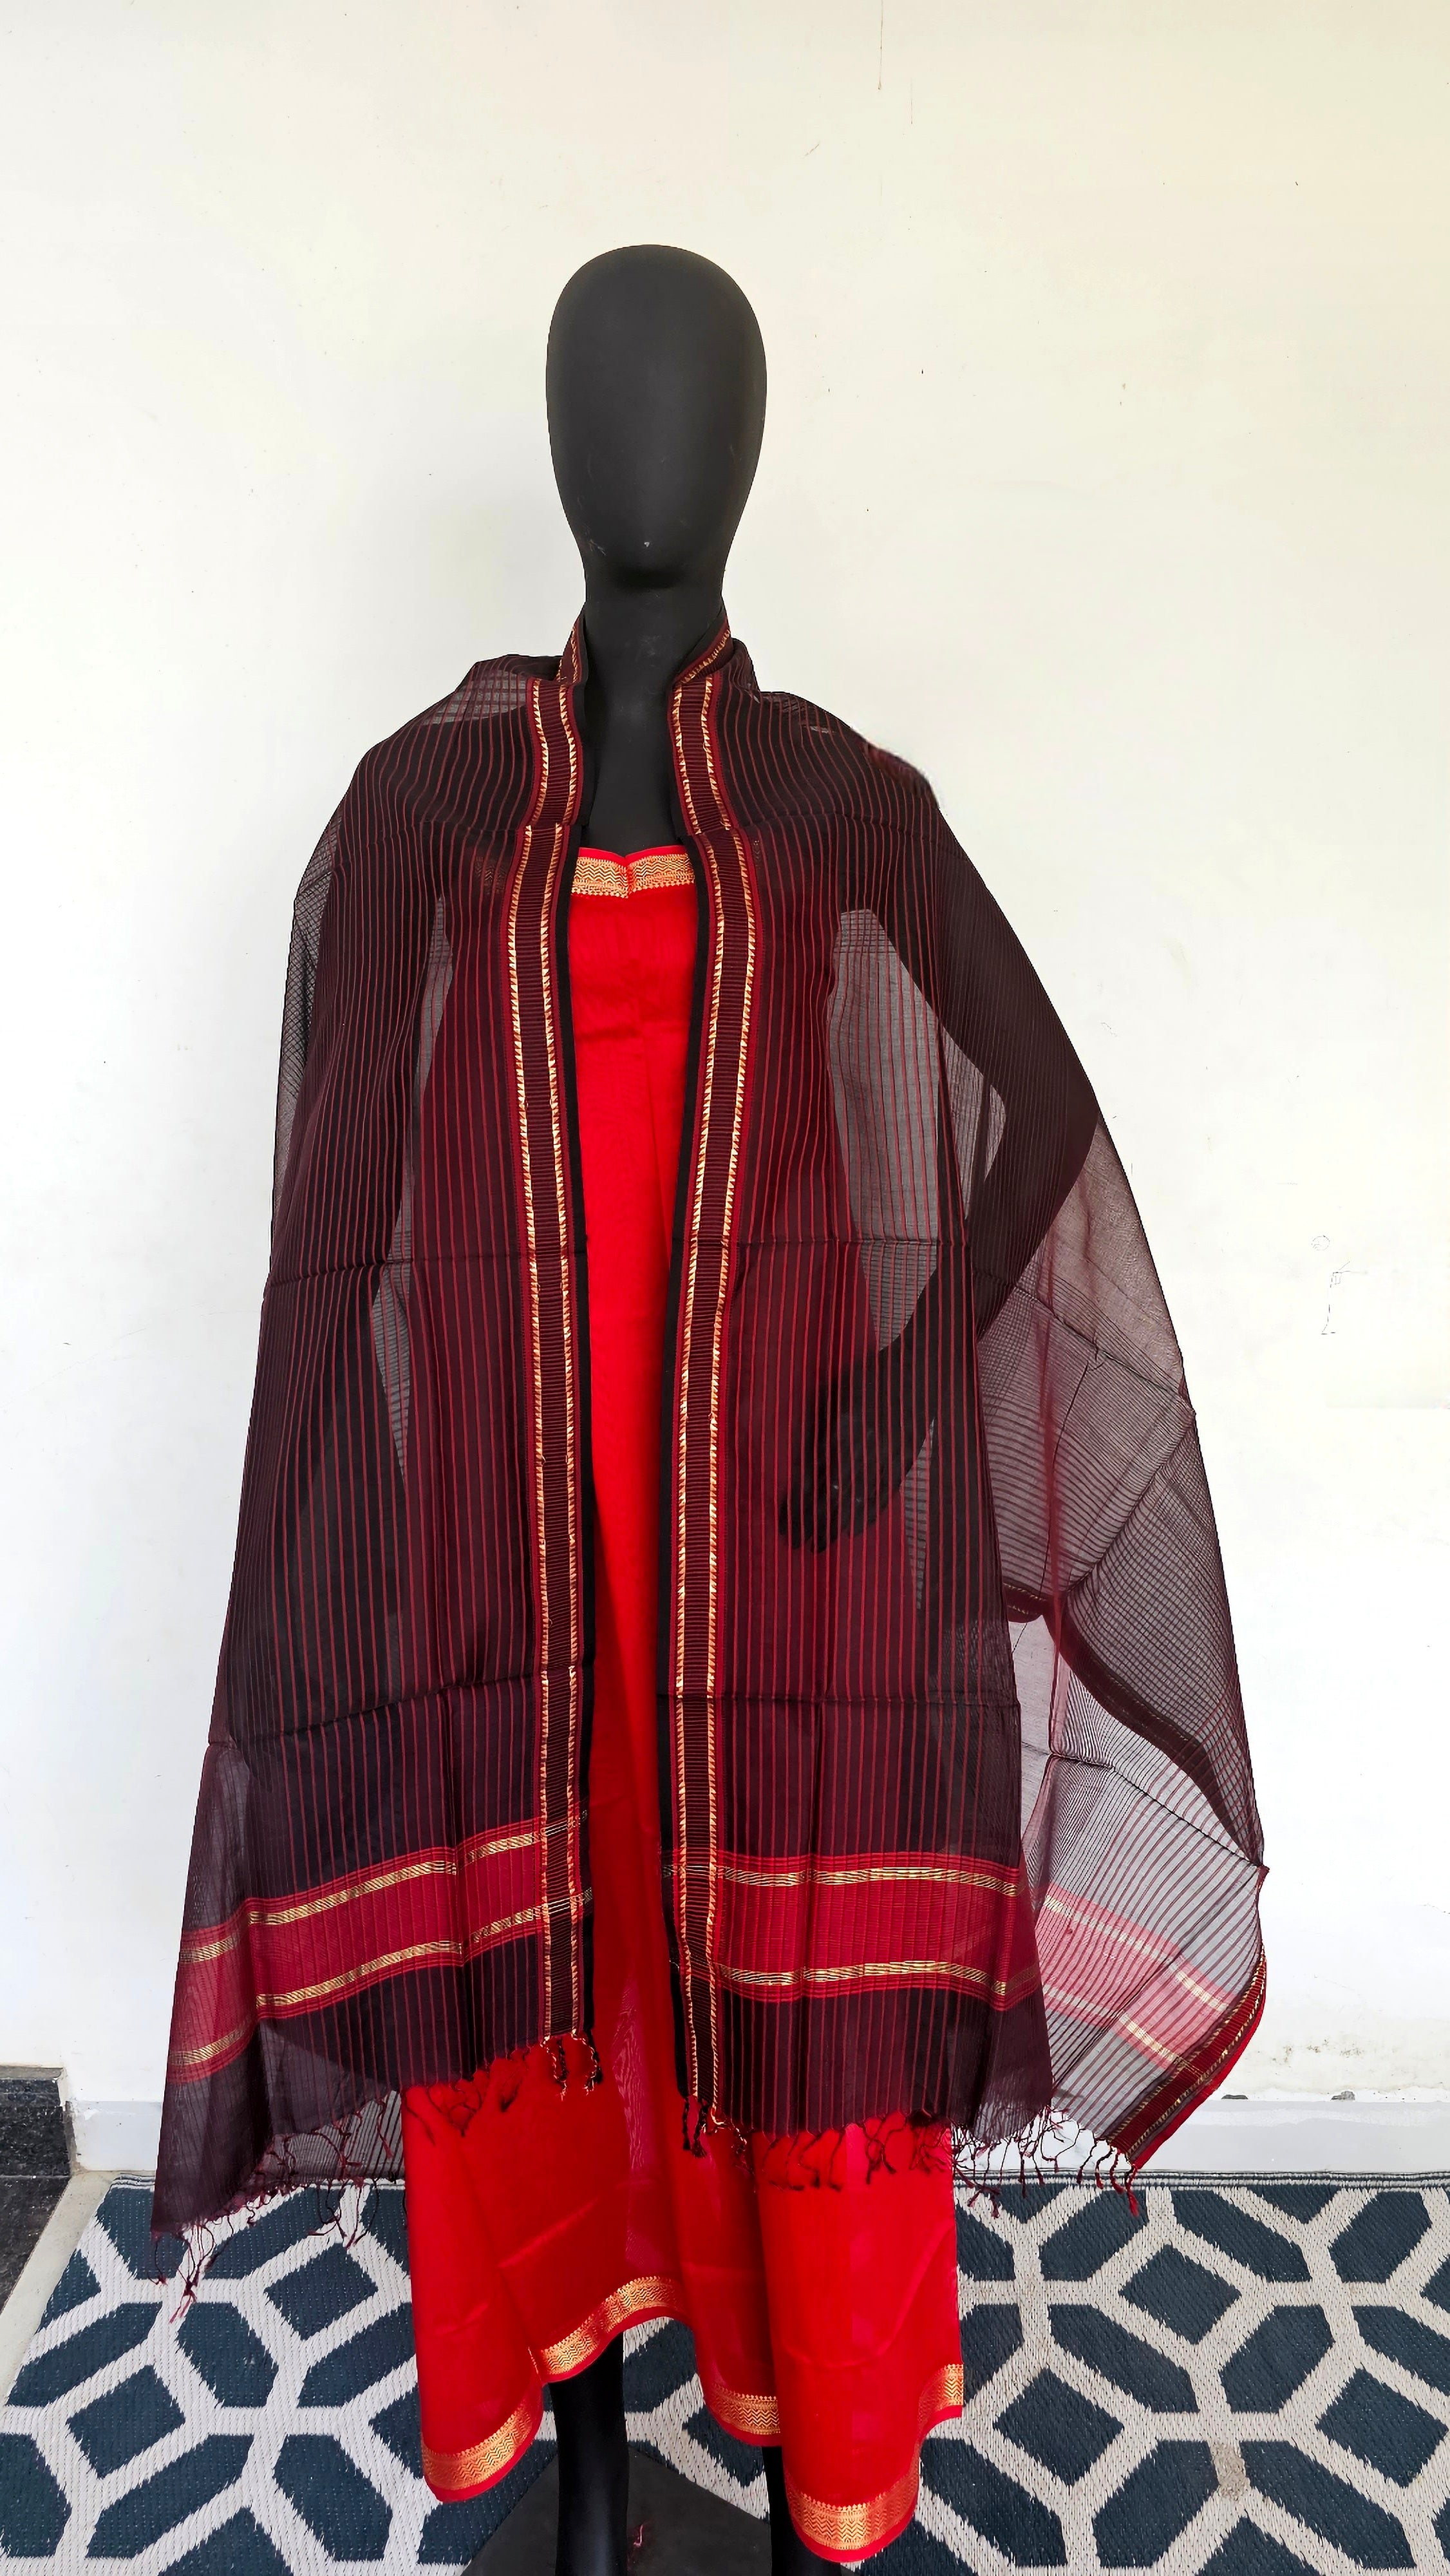 Black & Red Bliss: Top & Dupatta Delights – Weave Your Wardrobe with a Dash of Playfulness!